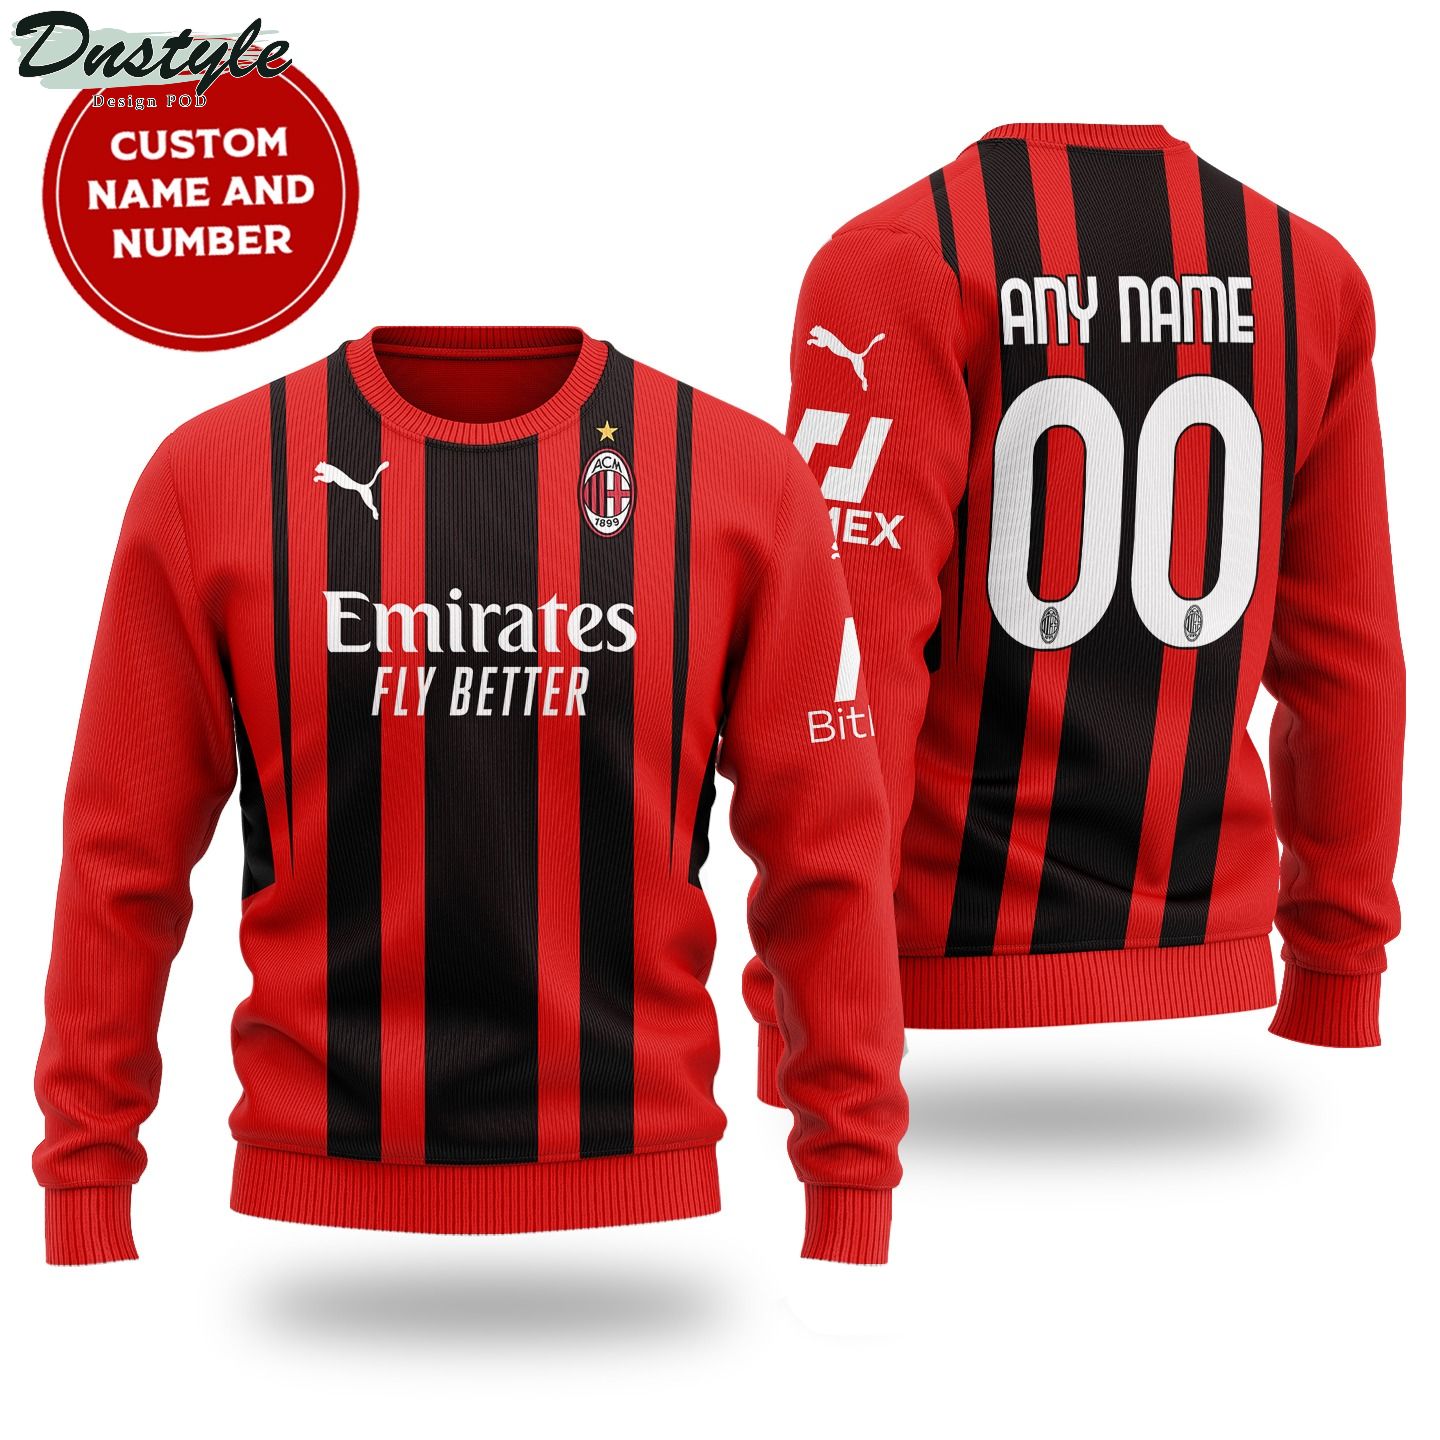 Ac milan custom name and number home sweater